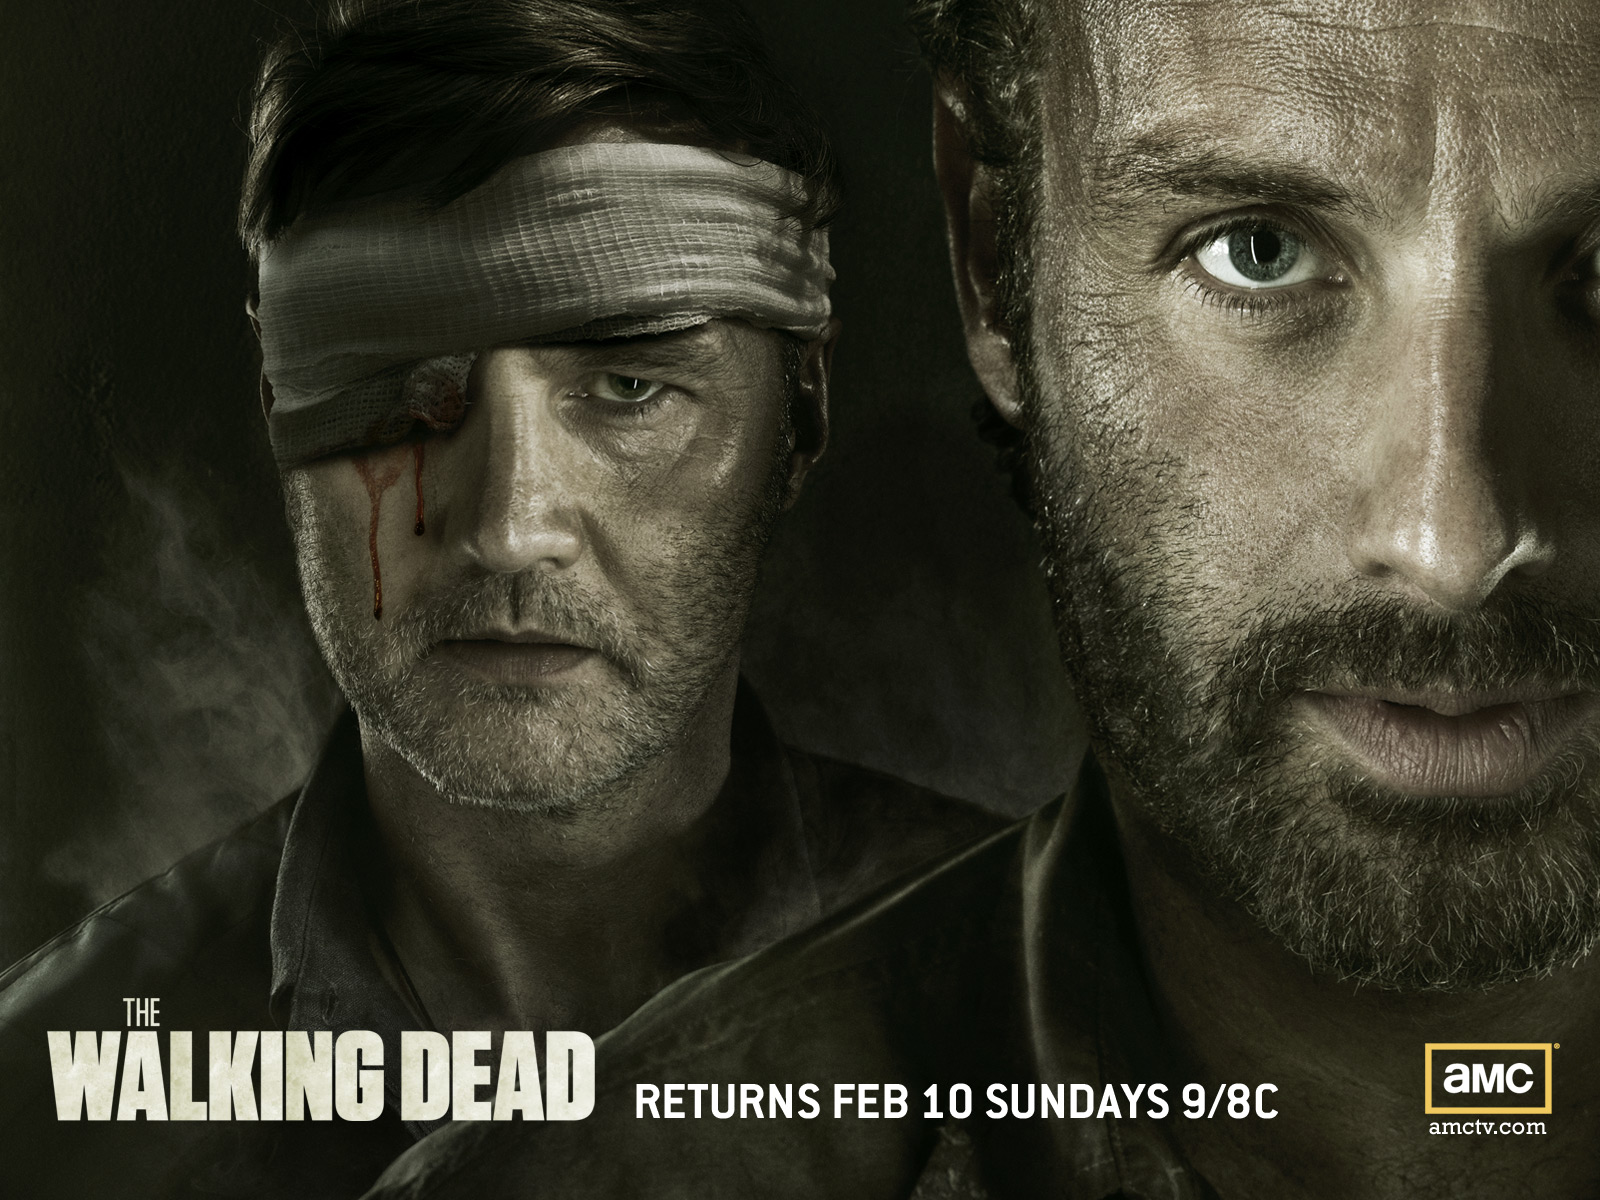 The Governor And Rick Grimes